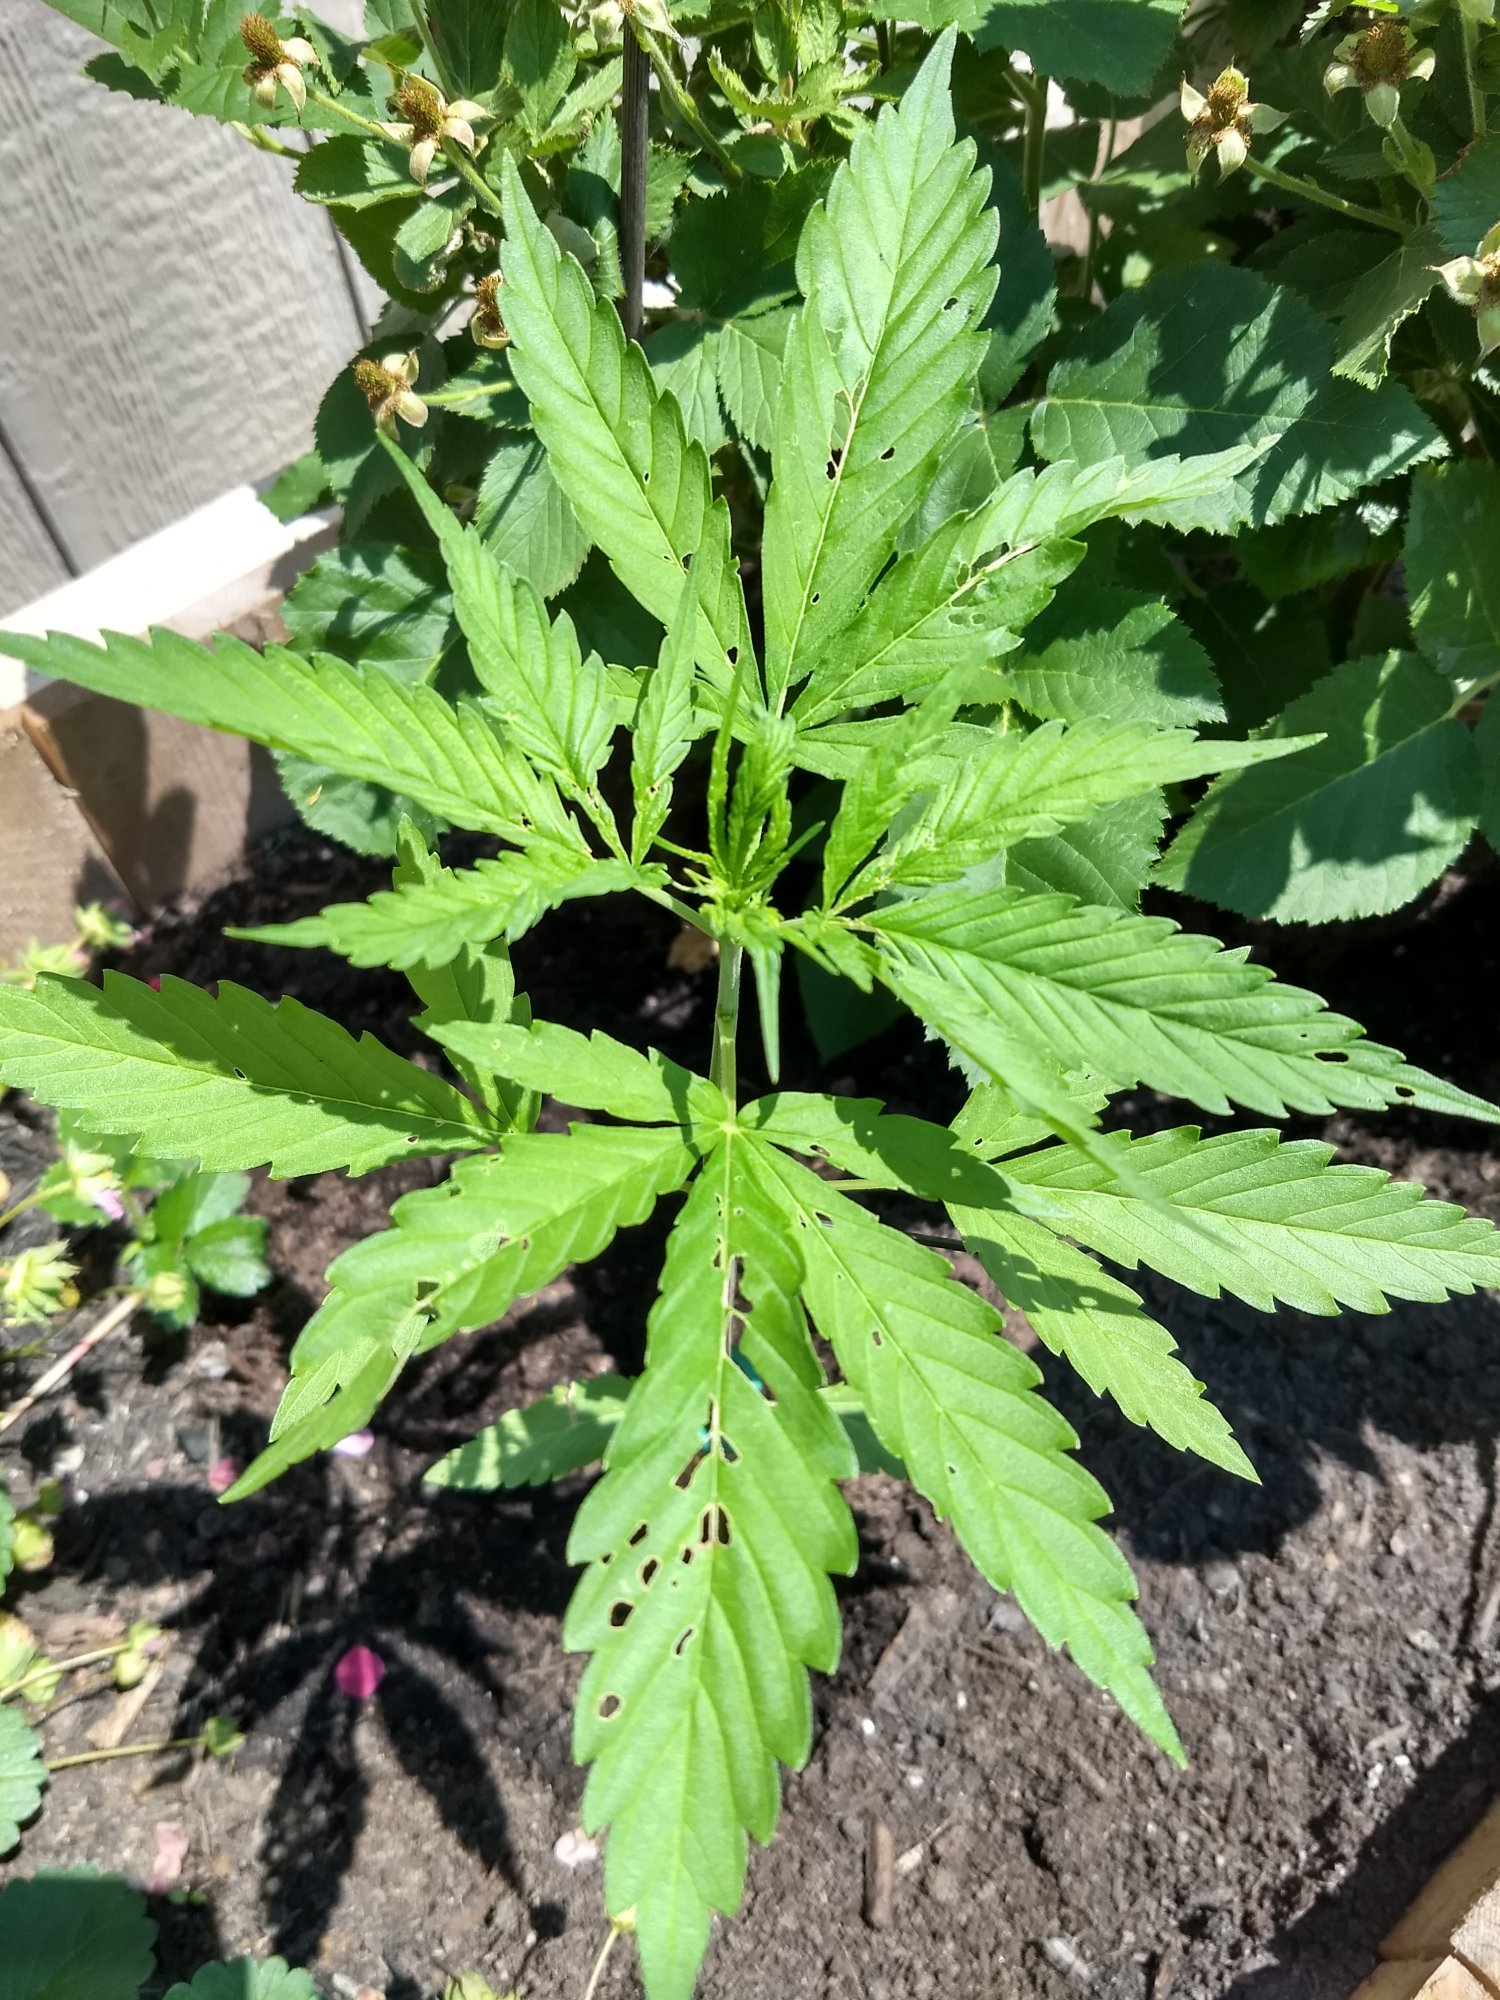 Diagnose my plants issue